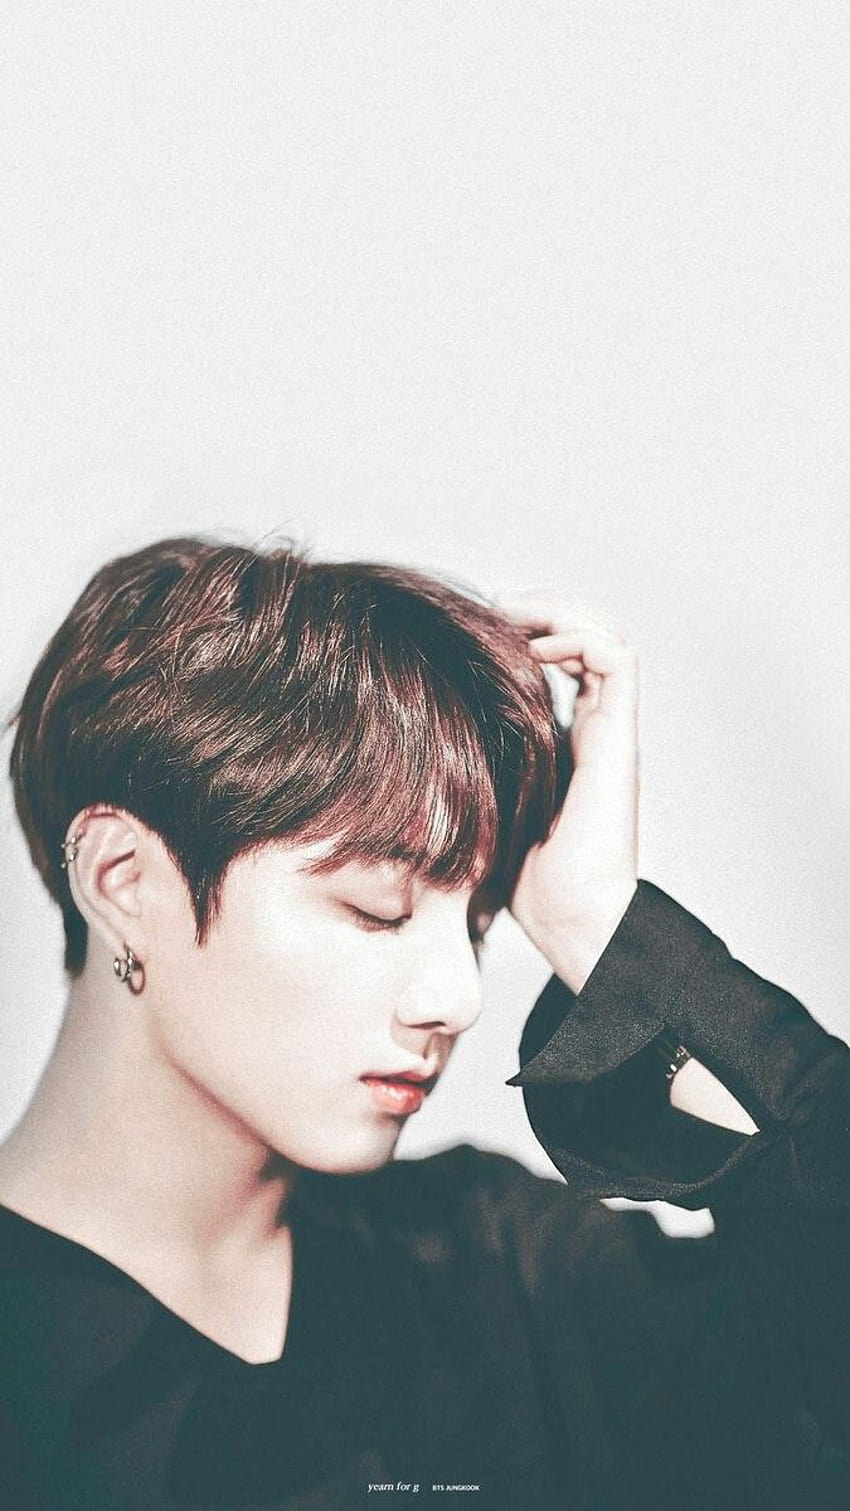 17 Jungkook Cute For iPhone, Android and !, bts jungkook phone HD phone ...